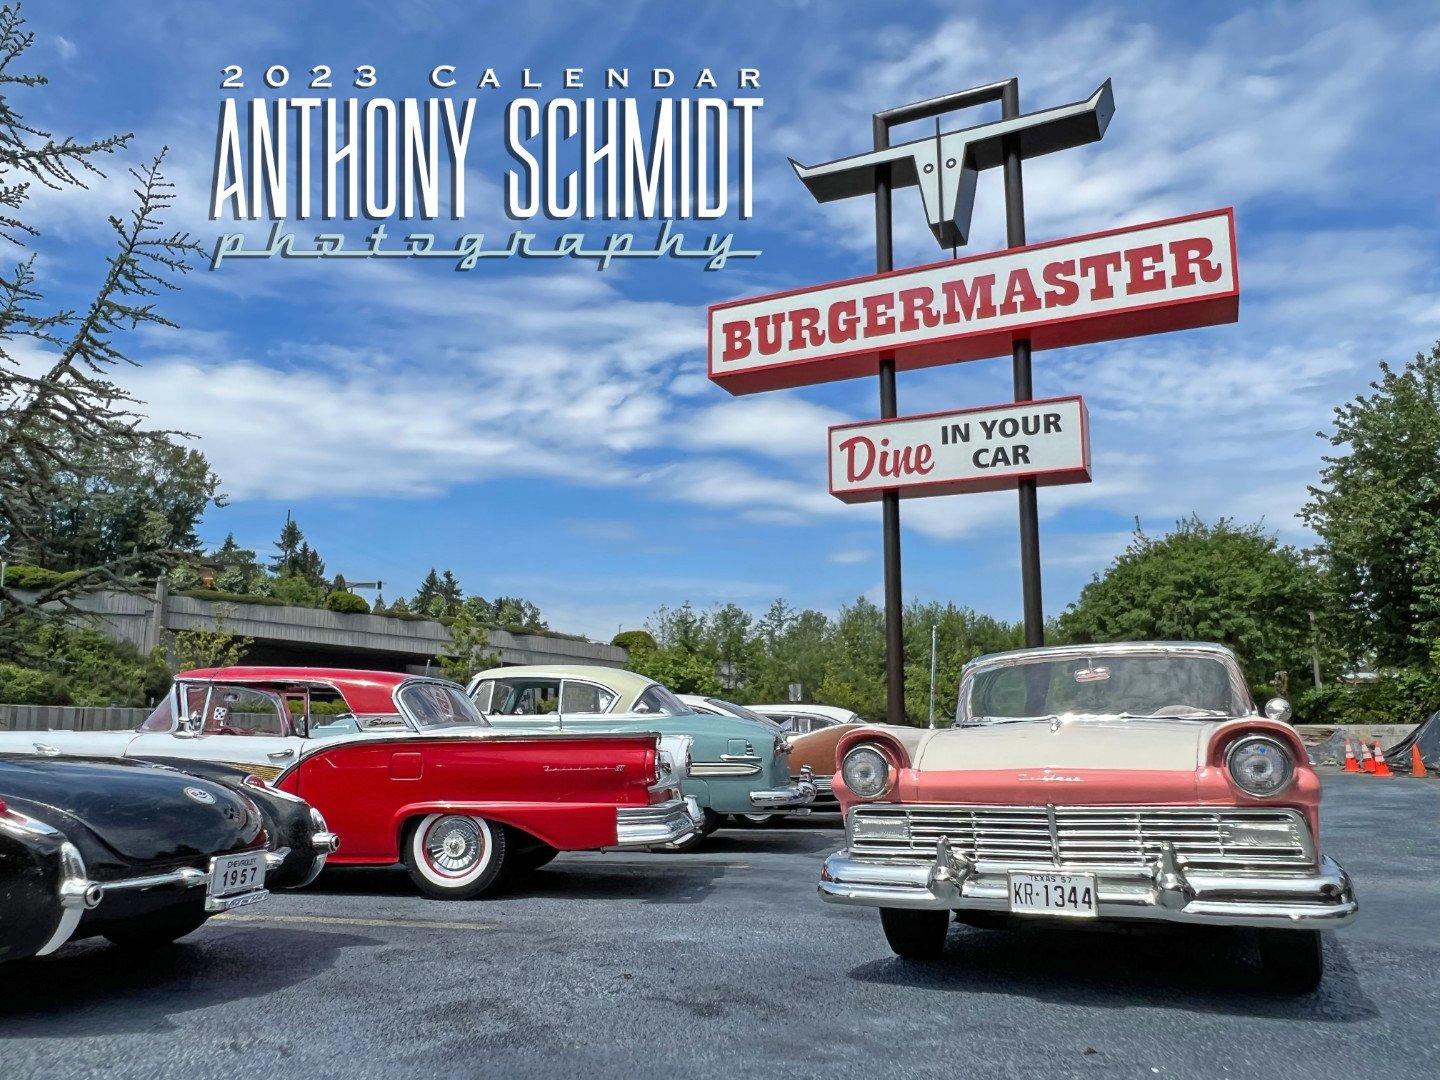 Anthony Schmidt Photography 2023 Calendar —Back in stock order now!